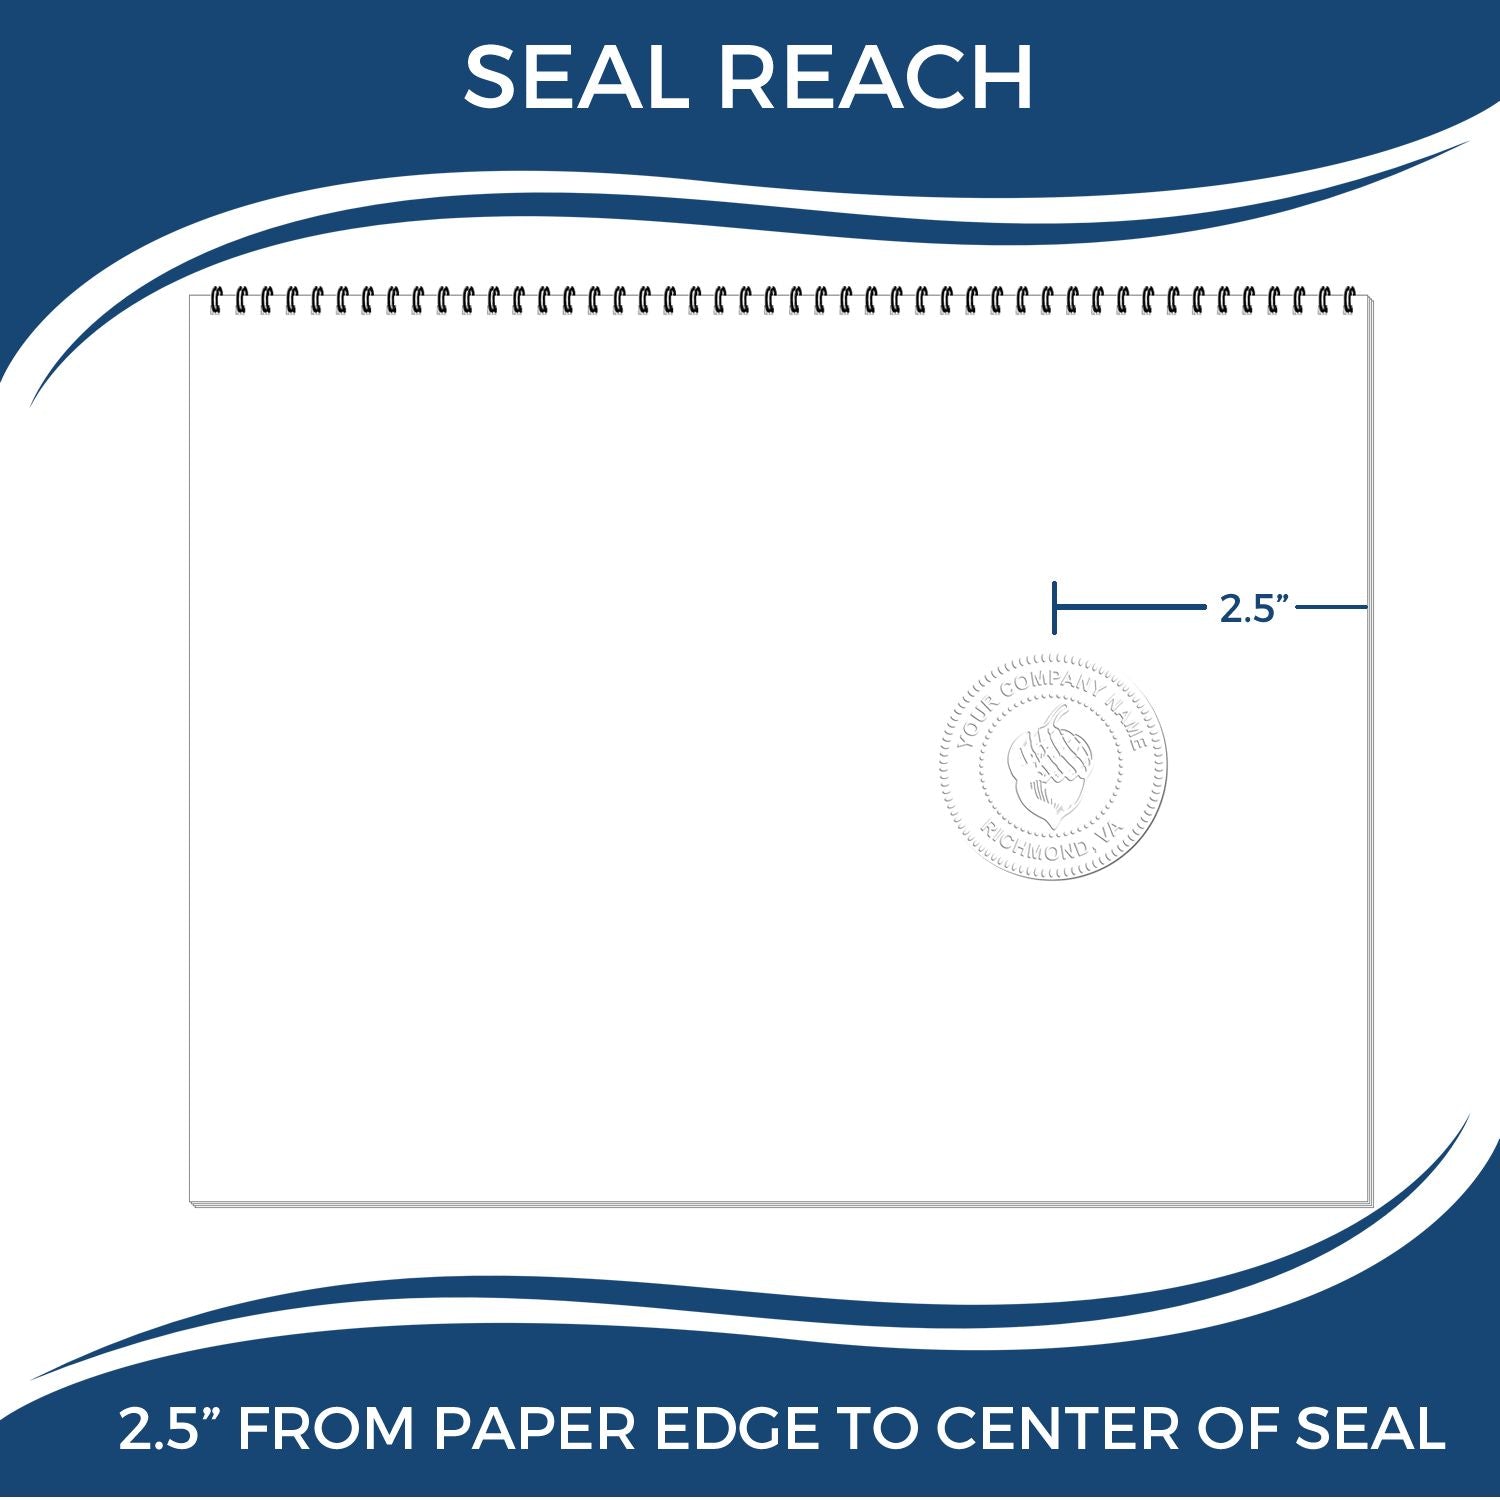 An infographic showing the seal reach which is represented by a ruler and a miniature seal image of the Heavy Duty Cast Iron Georgia Geologist Seal Embosser